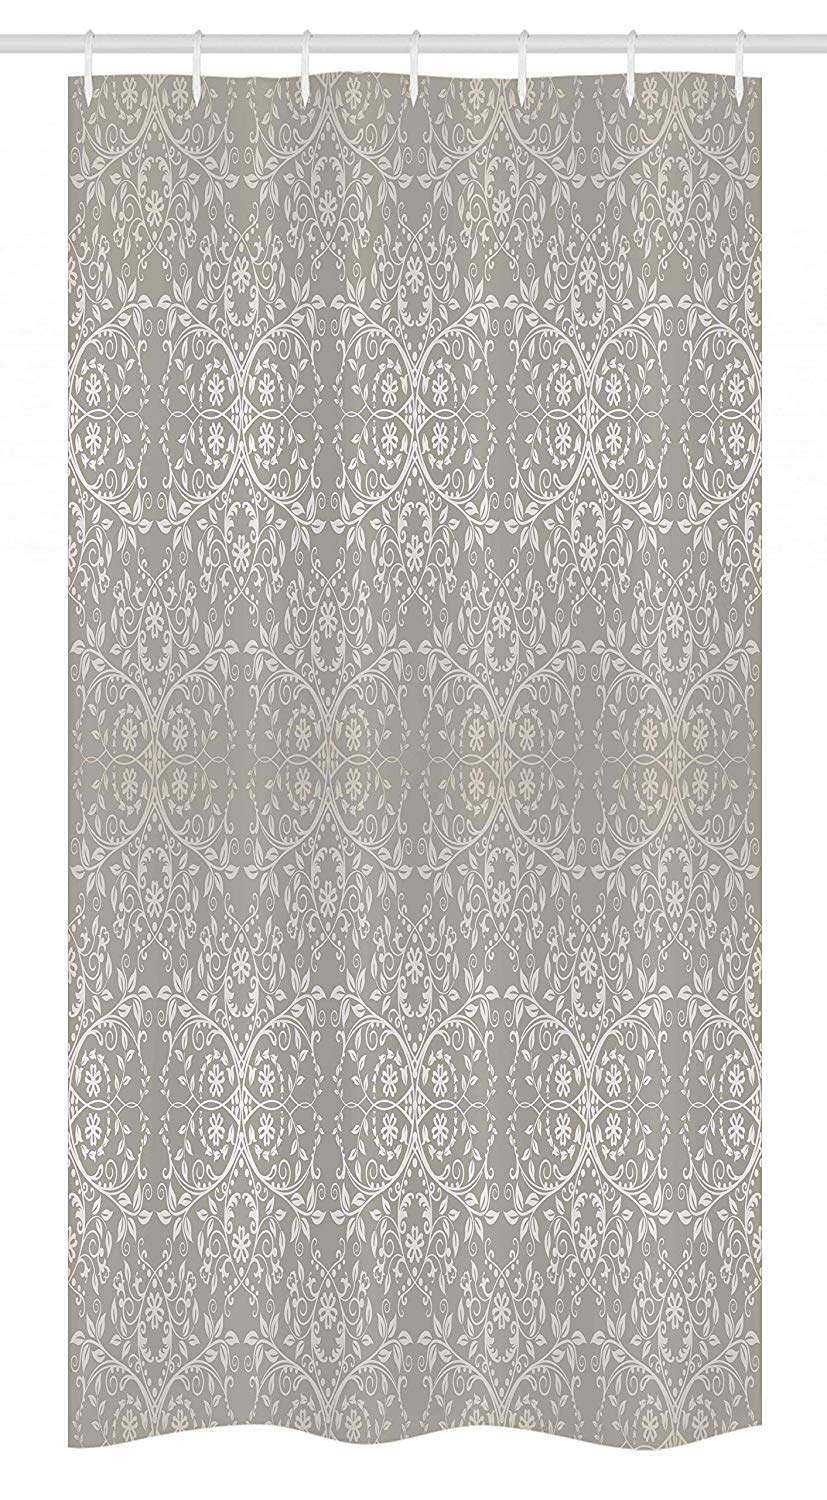 Ambesonne Grey Stall Shower Curtain, Victorian Lace Flowers and Leaves Retro Background Old Fashioned Graphic Print, Fabric Bathroom Decor Set with Hooks, 36 W x 72 L Inches, Warm Taupe Beige